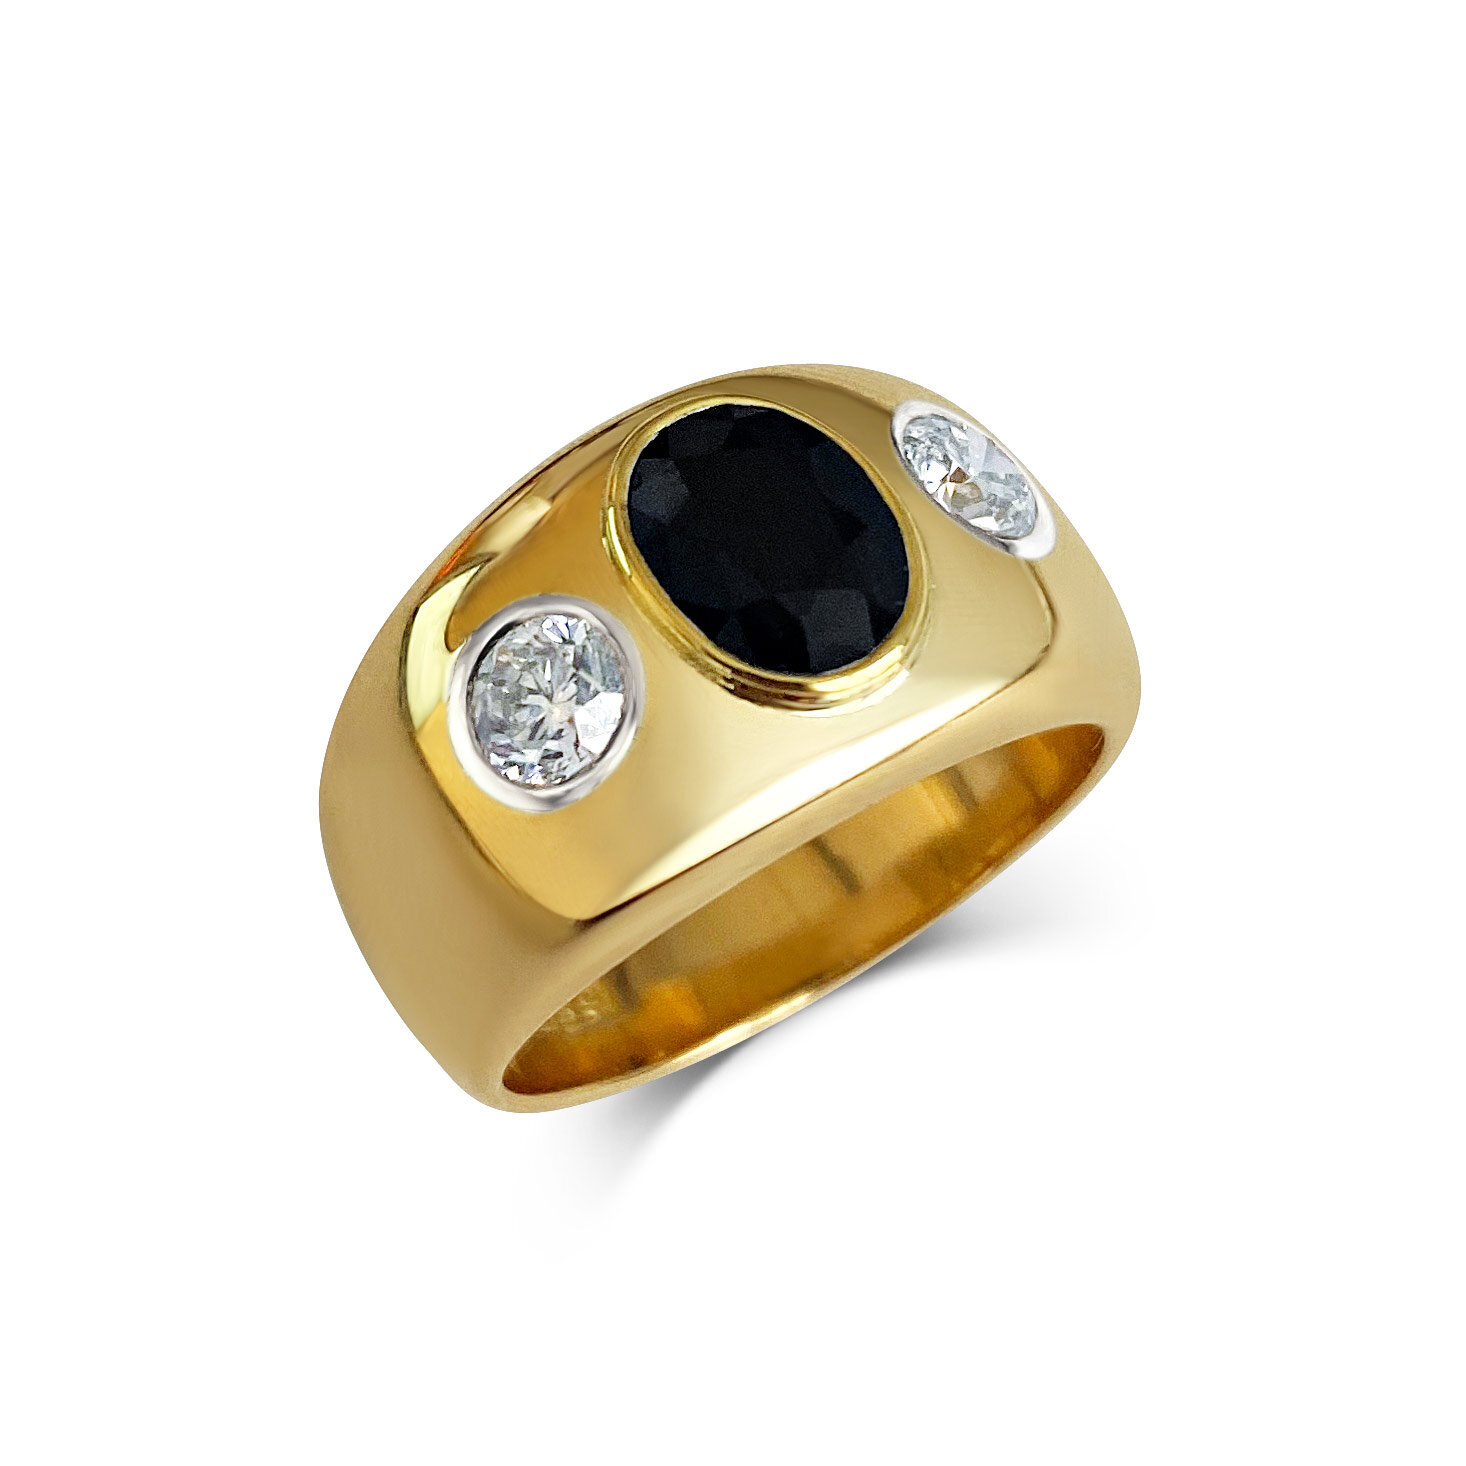 Sapphire and diamond three-stone gypsy&nbsp;ring mounted in 18ct yellow gold